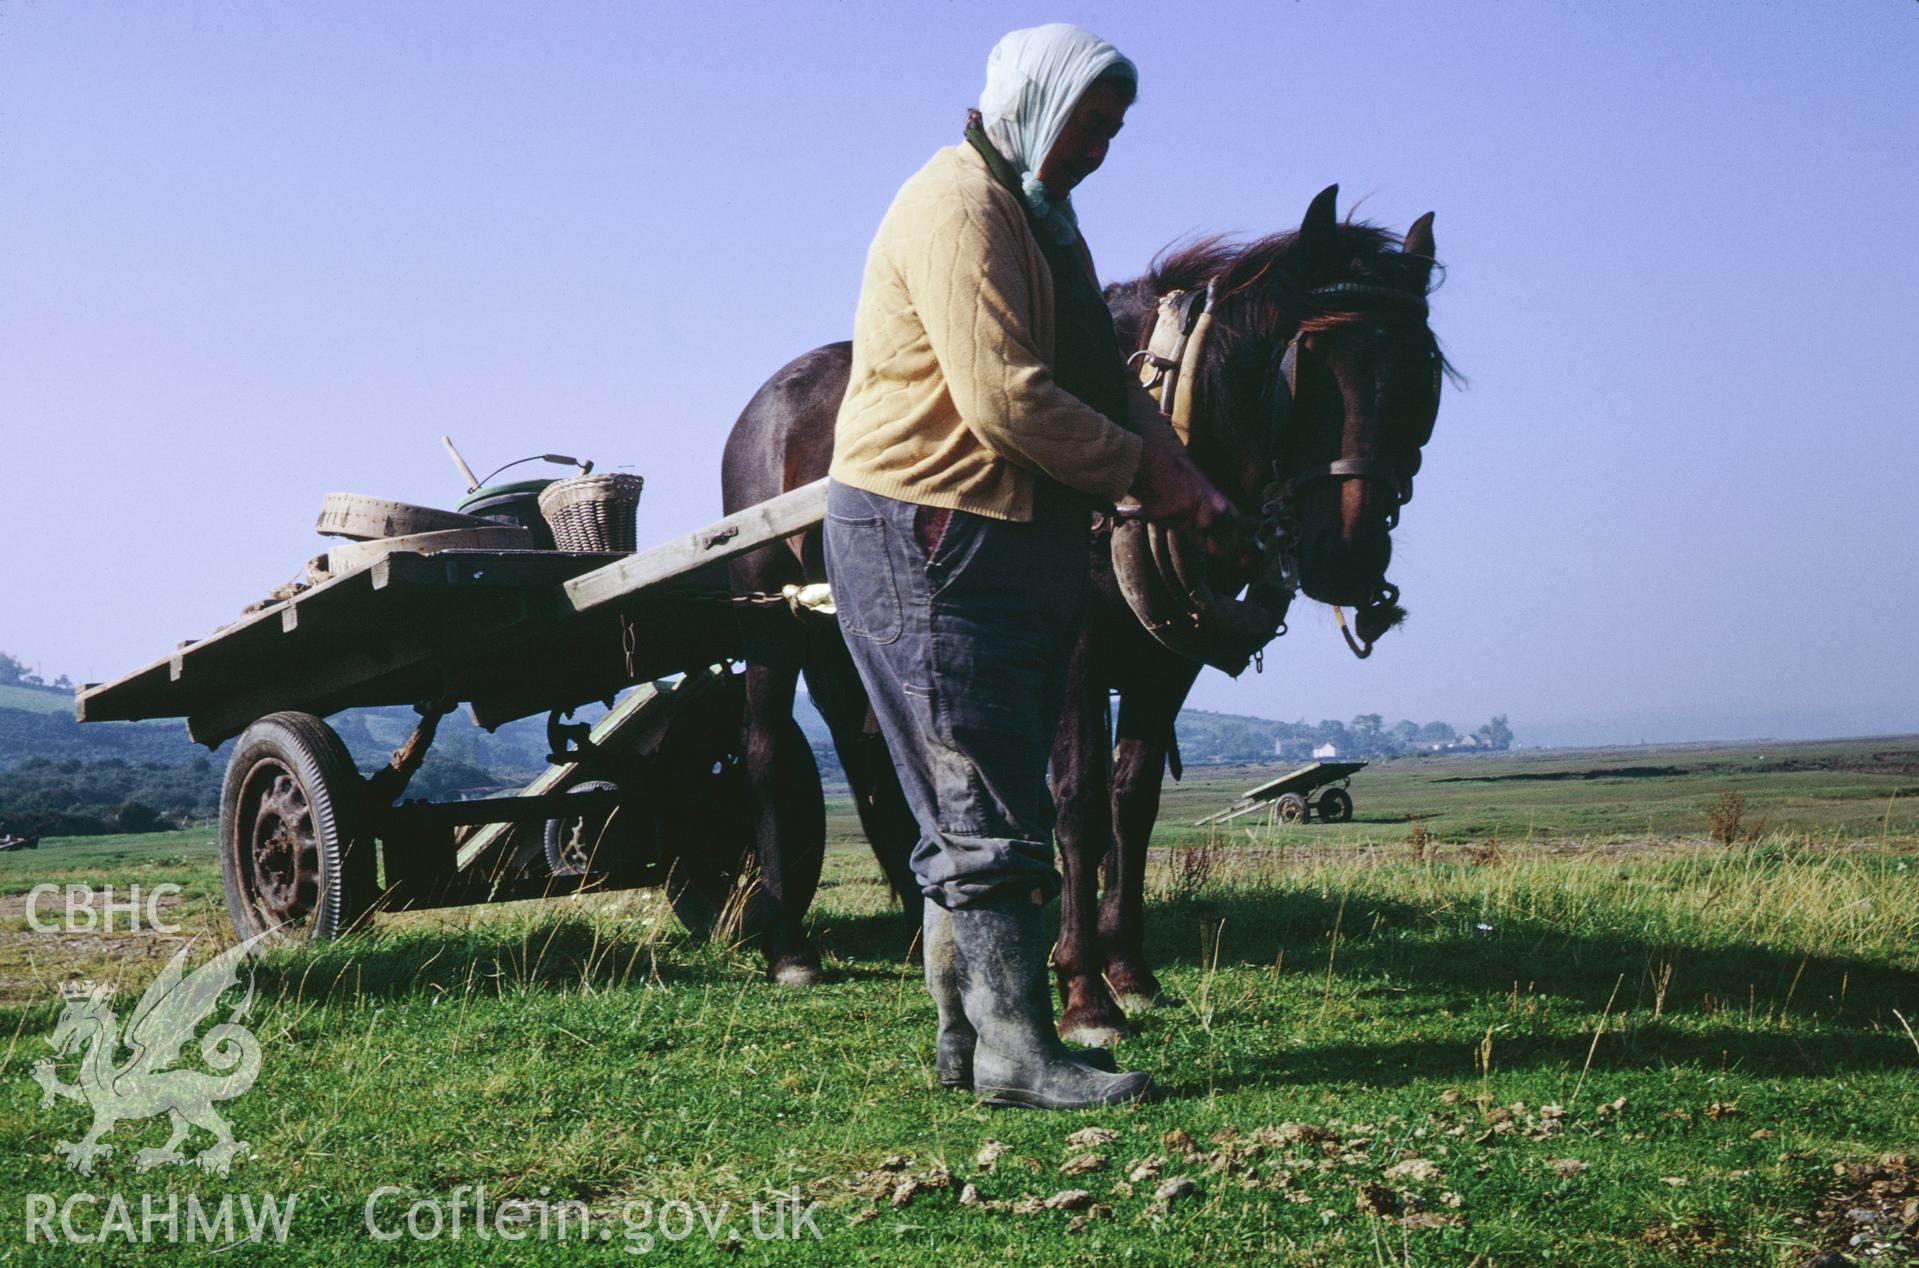 35mm colour slide showing cockle pickers at Penclawdd, Gower, Glamorgan,  by Dylan Roberts.